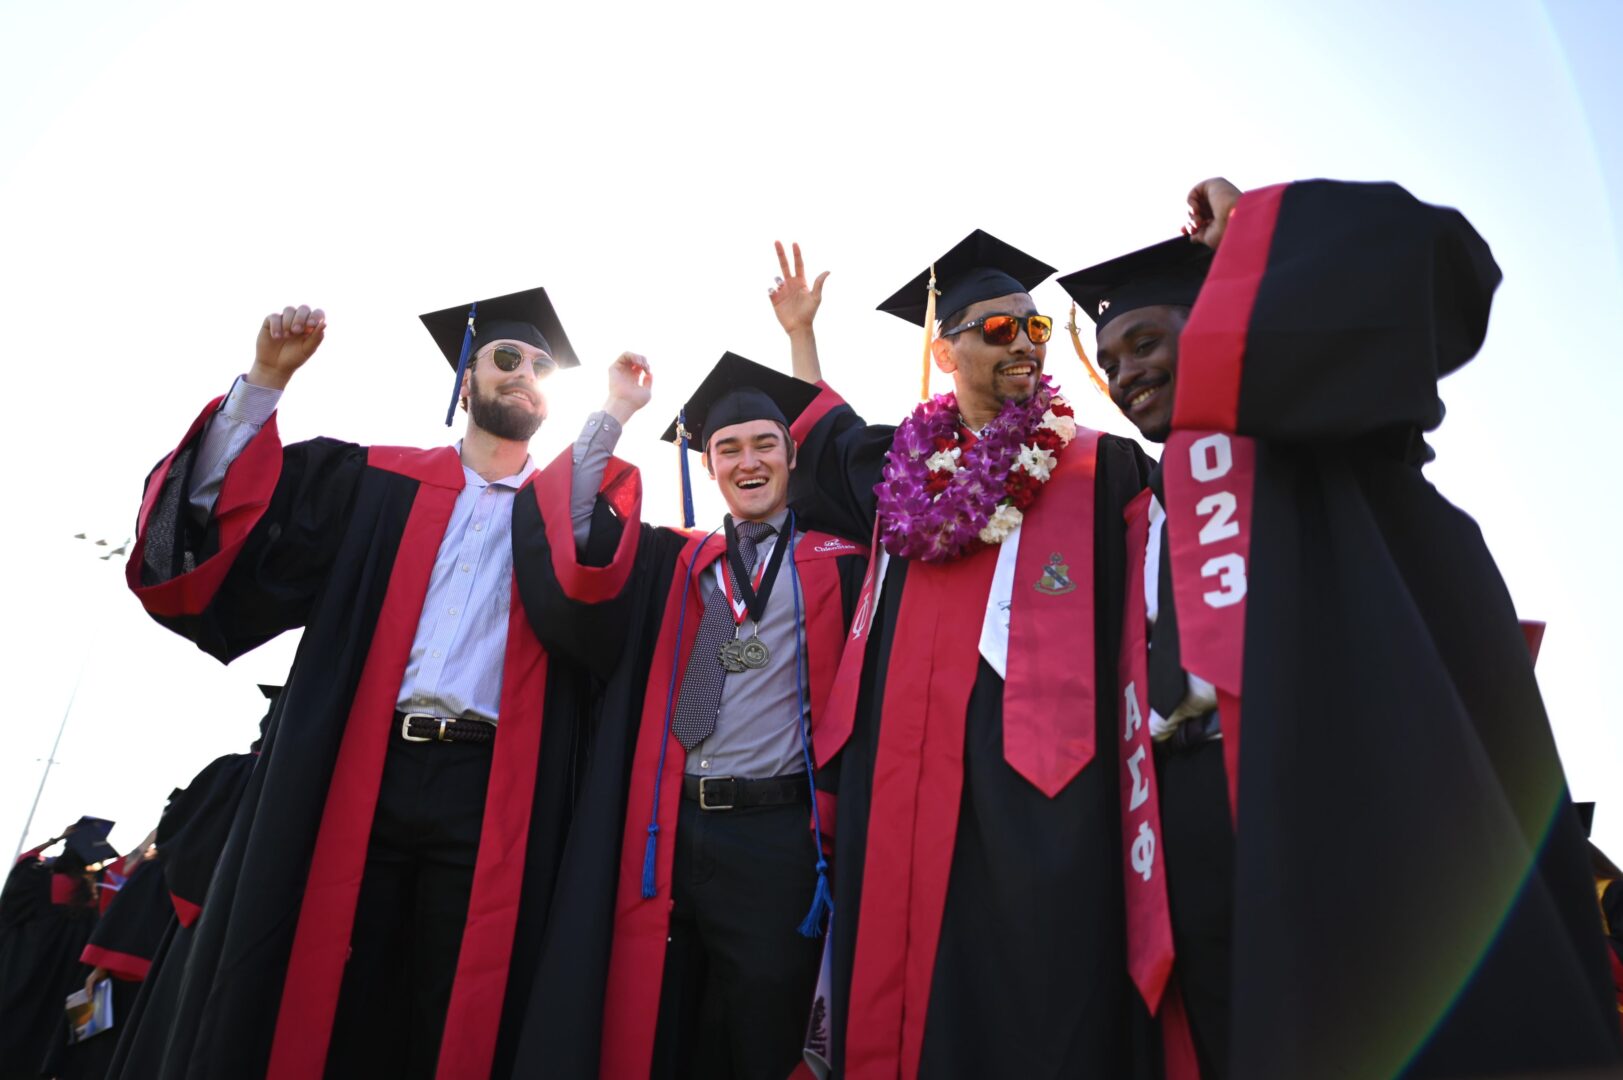 Four students wearing caps and gowns celebrate their college graduation.